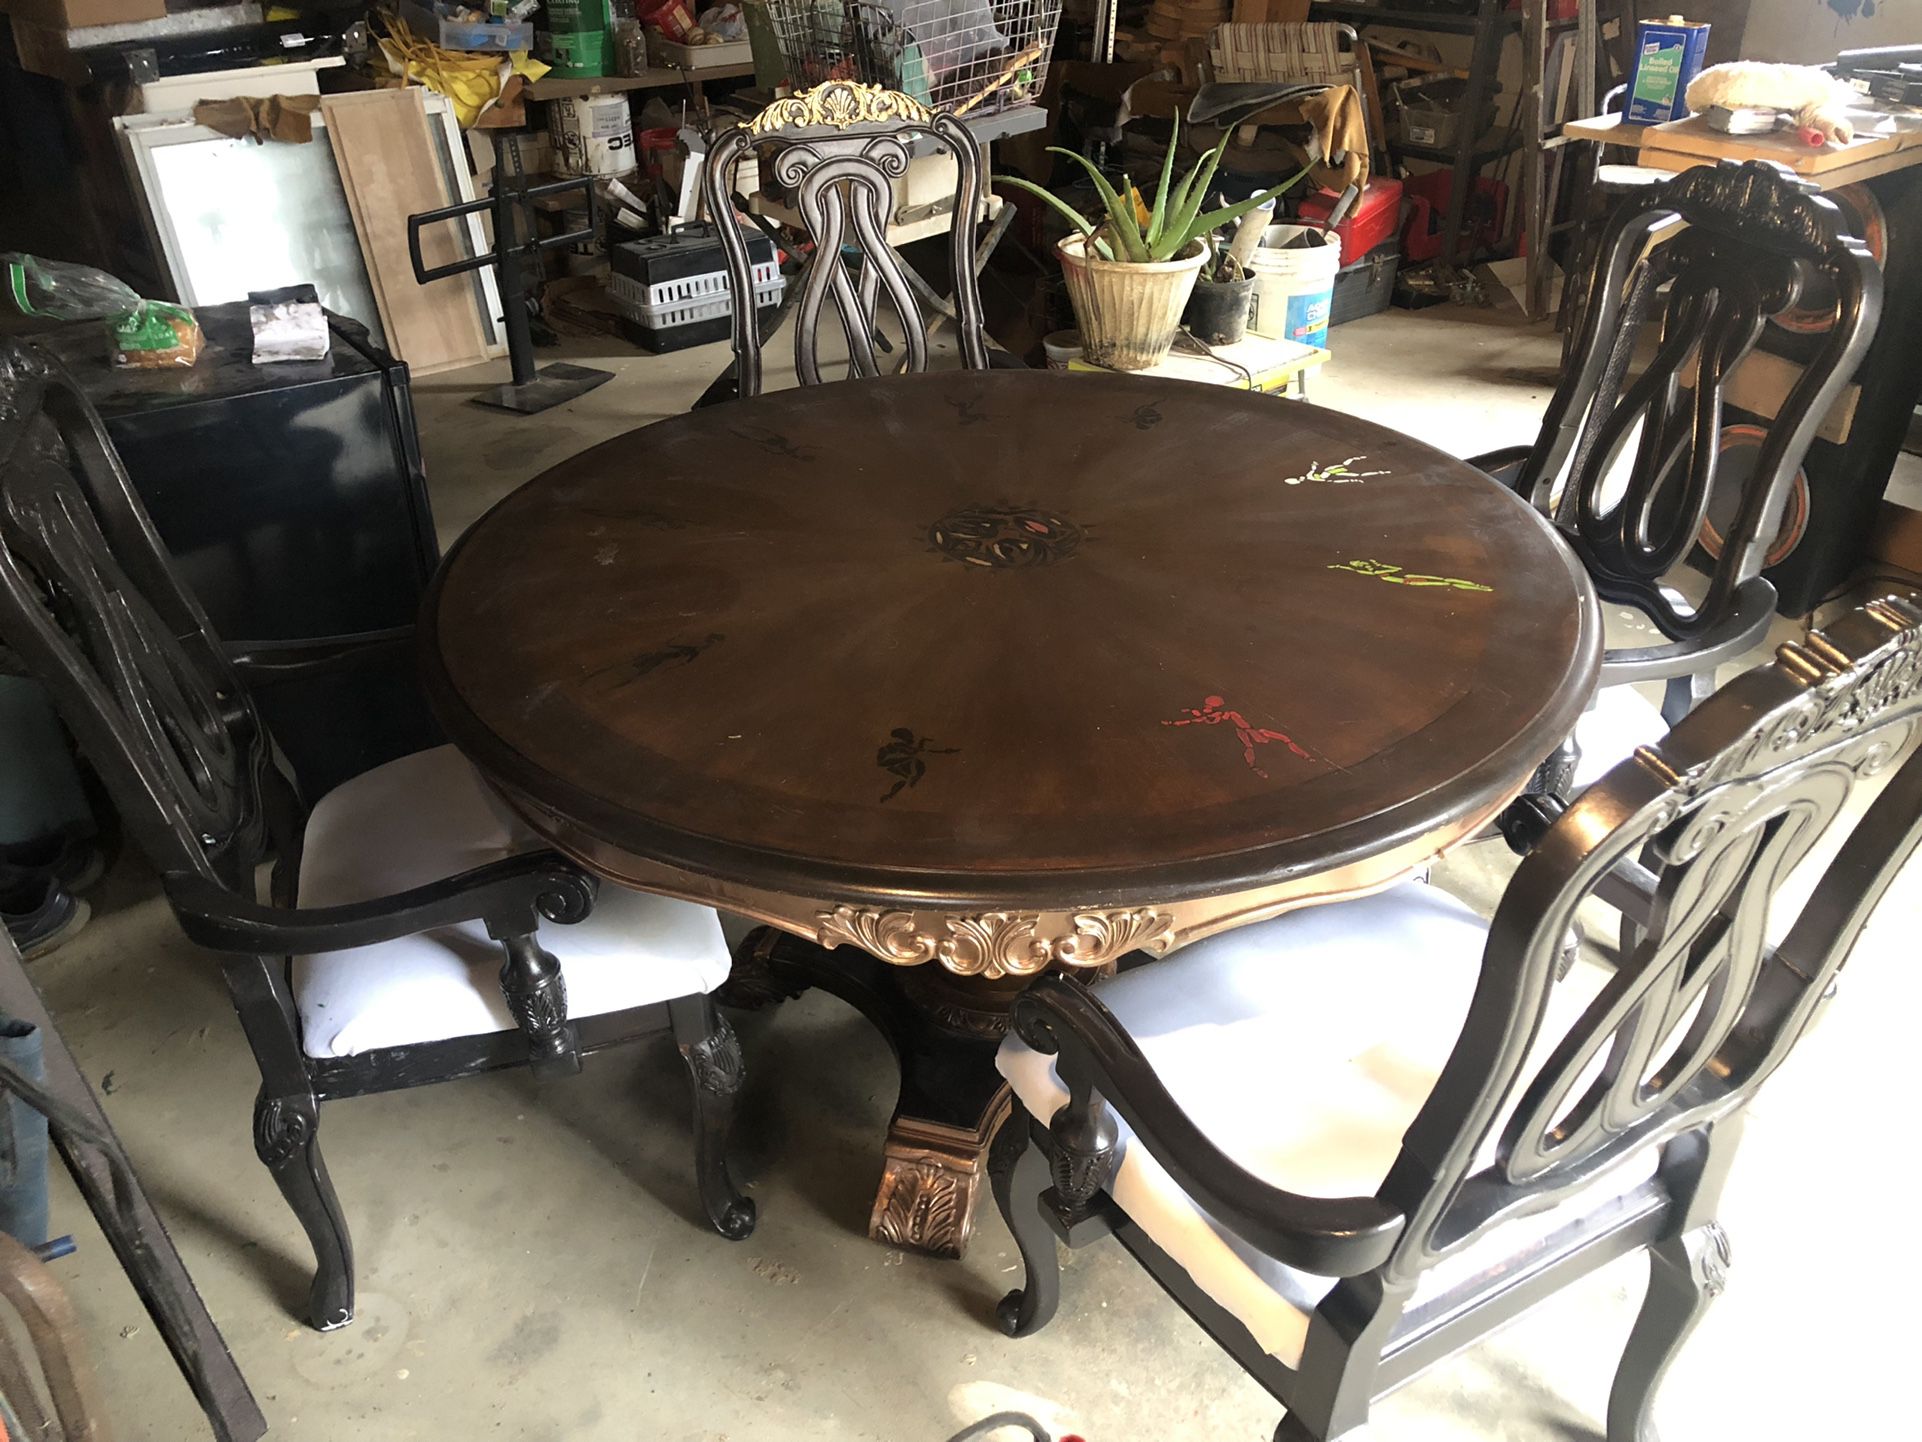 54” Round Table & Chairs